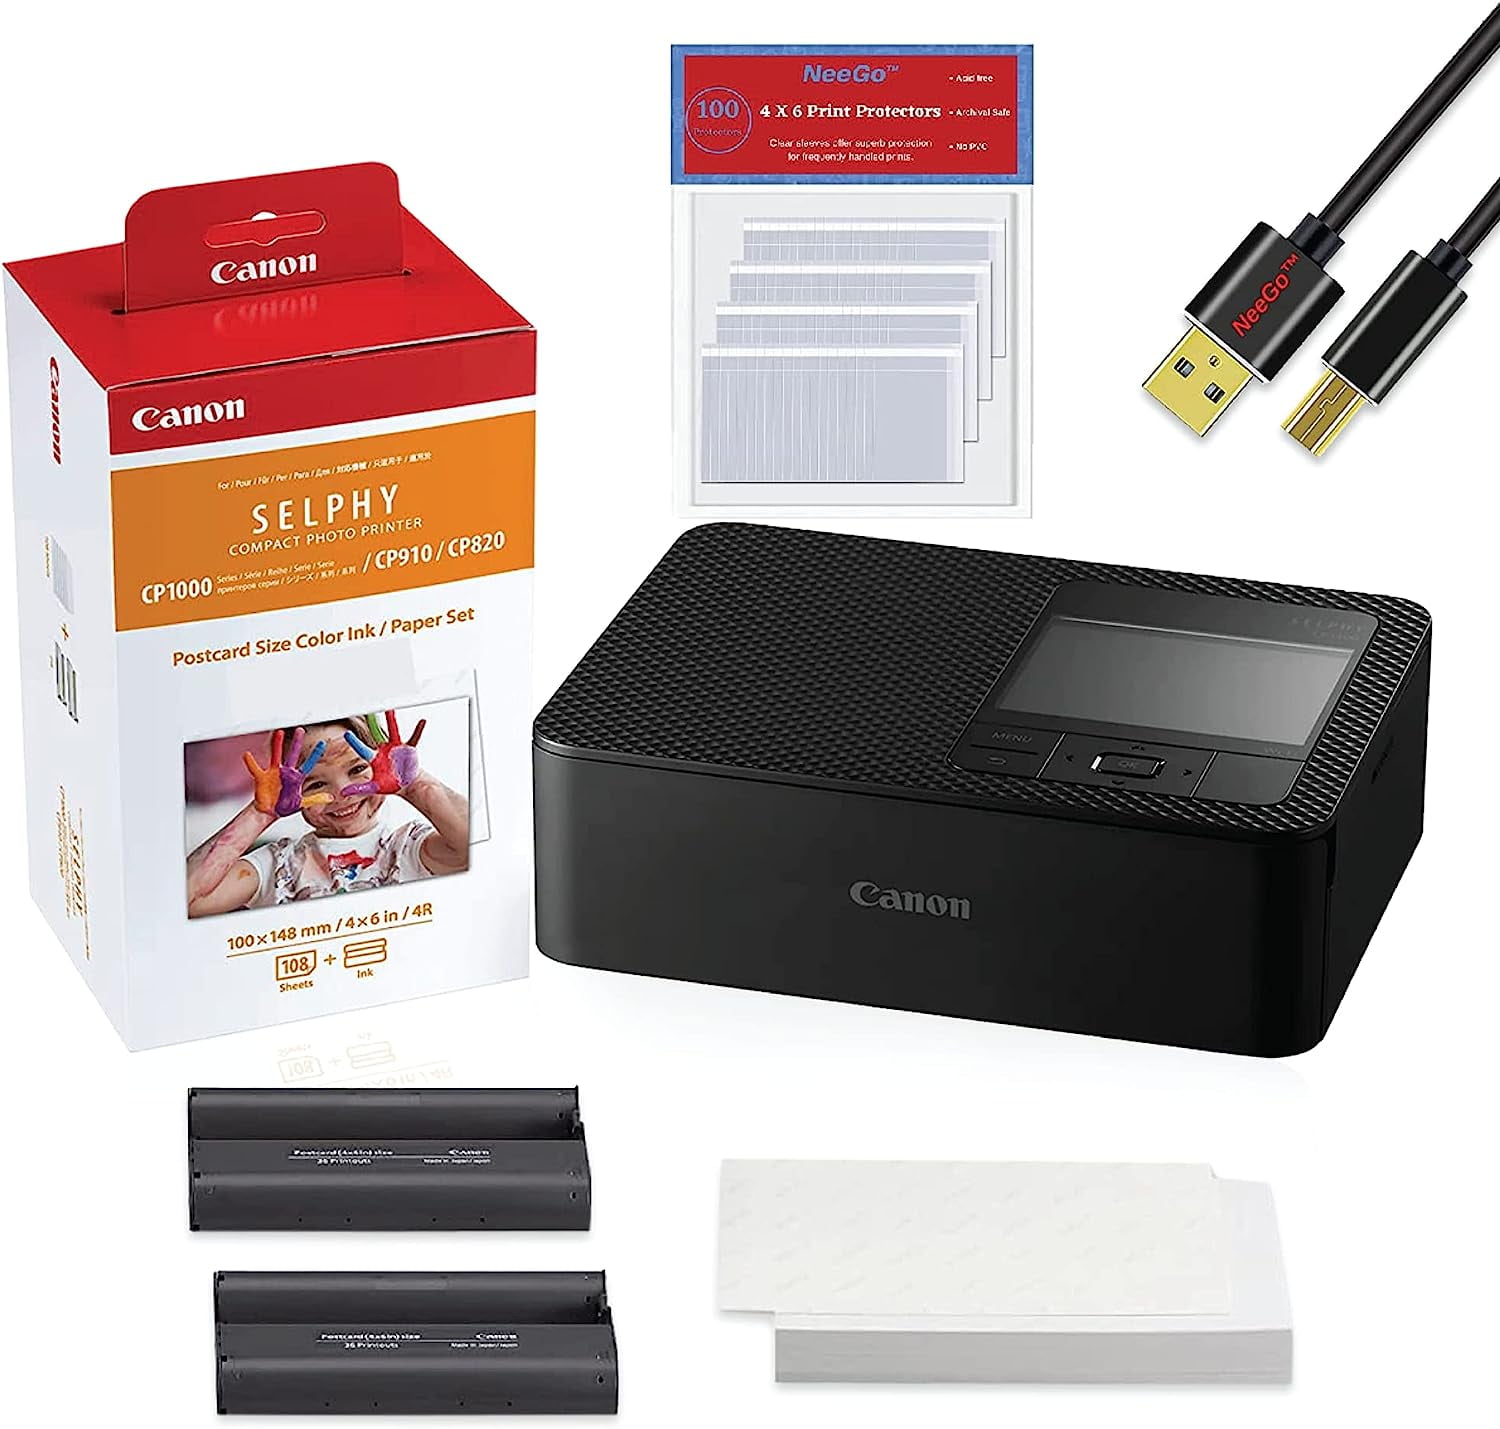 canon SELPHY Printer, Instant Photo Printer with 108 Color Ink Paper Set  Selphy CP1500 Wireless Portable Photo Phone Printer (Black) Printer Cable